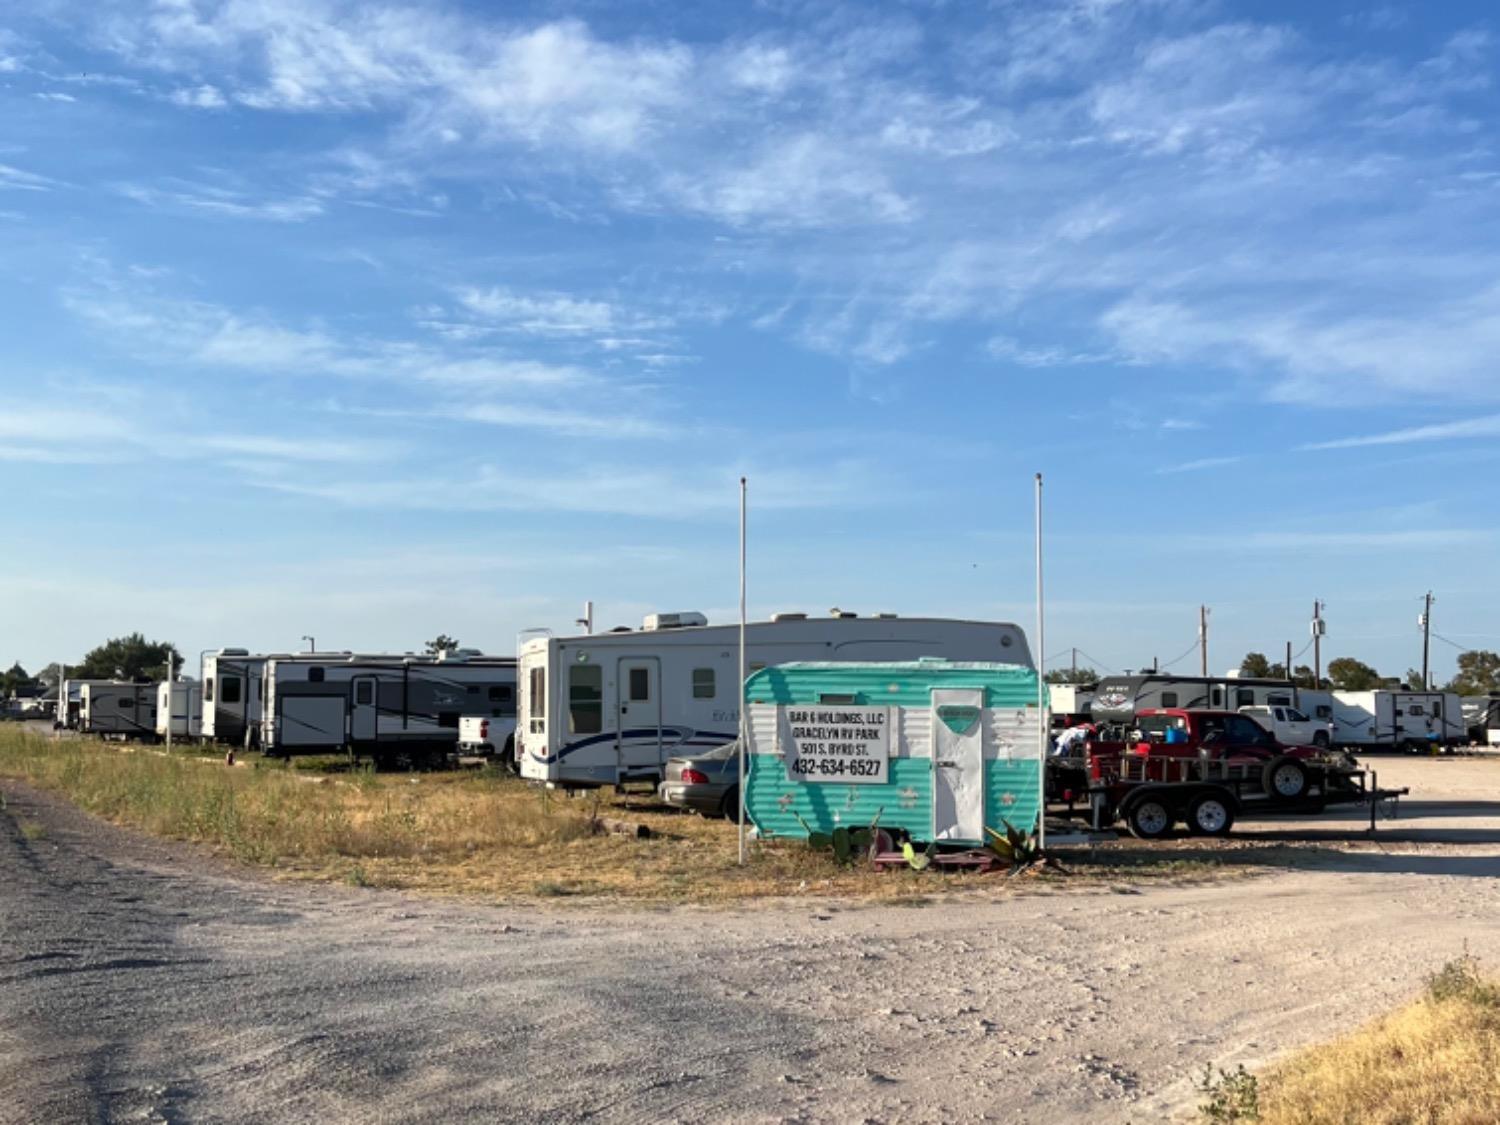 34 Space RV park, one rental cabin, one single wide duplex (currently two month to month tenants totaling $1550 monthly rents)    Average RV spot rents ~$500 per month    Cabin and duplex units rents ~$750 per month    Located outside of city limits    City water supply and septic system    85% occupied RV spots    100% occupied cabin and duplex units    Currently all tenants are on month-to-month rentals.    The park provides all utilities - water, sewer, trash, and electricity